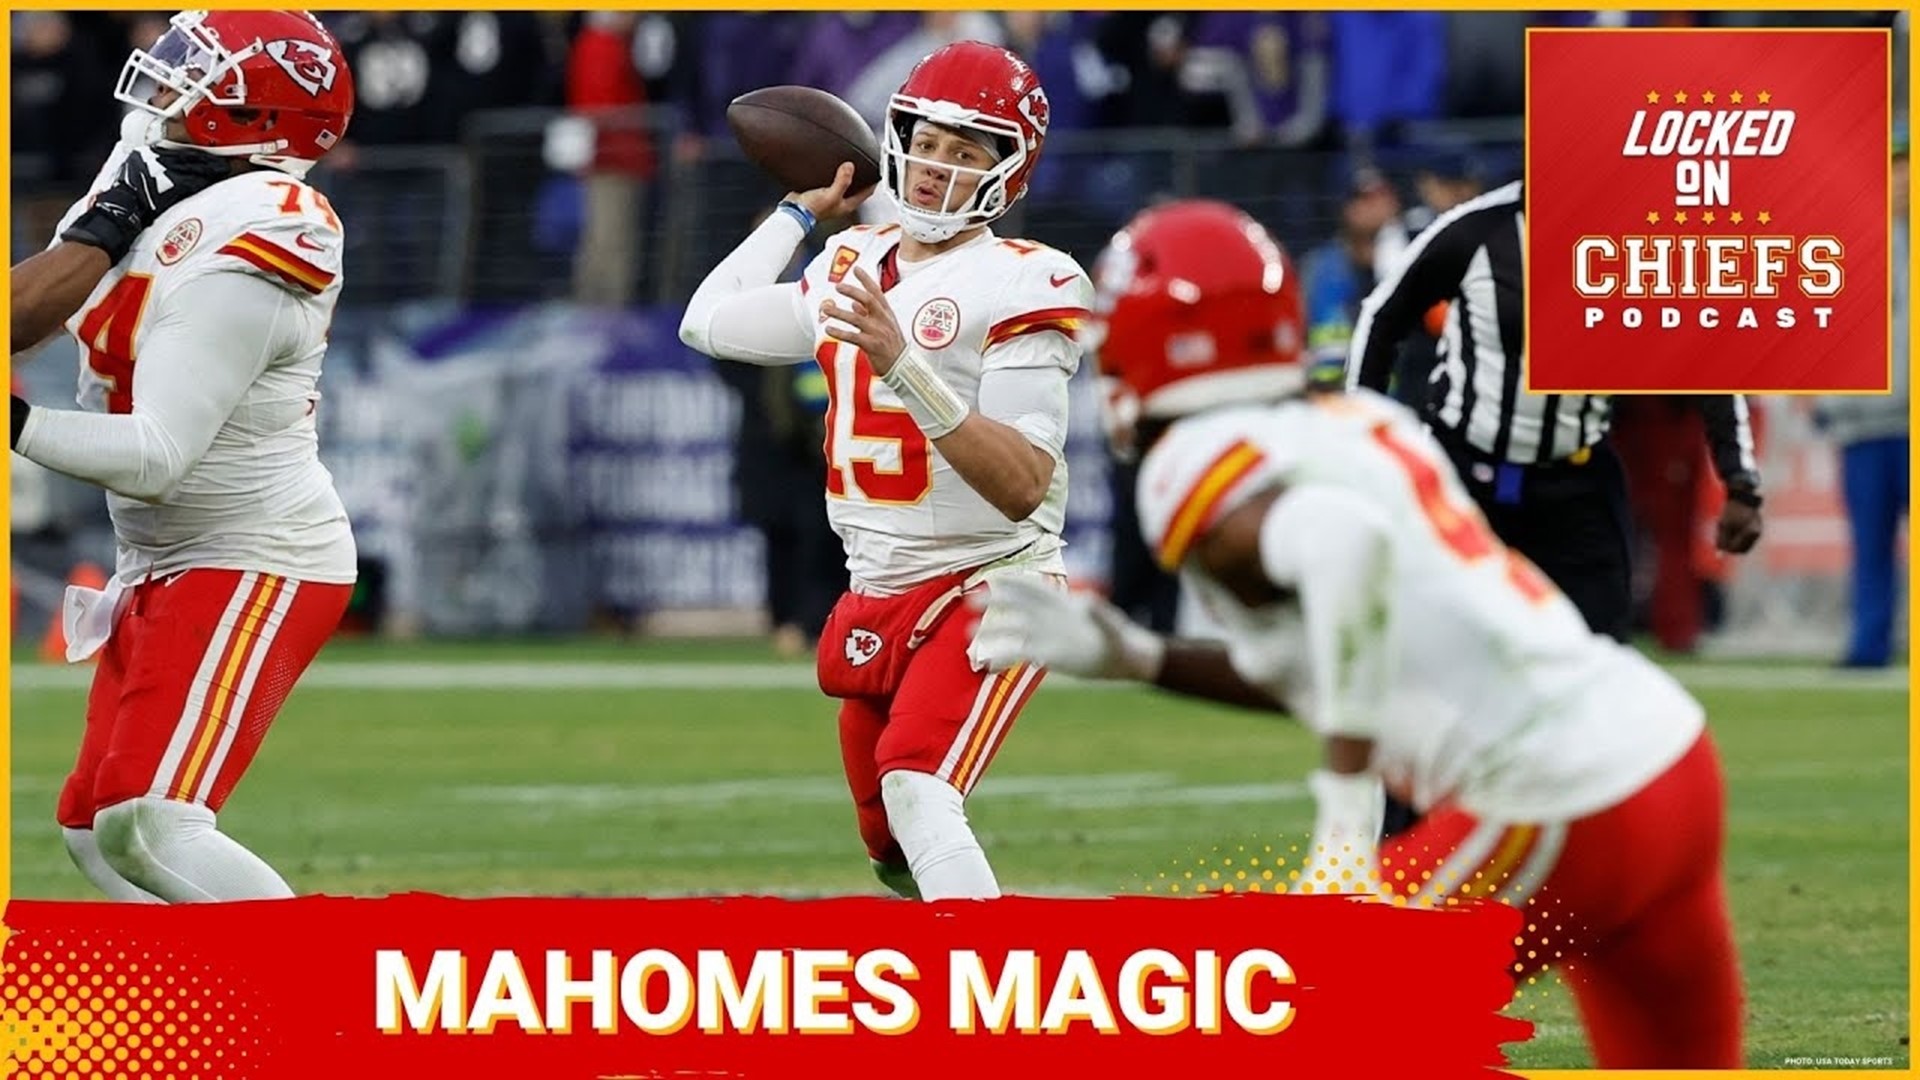 The Kansas City Chiefs dealt with a struggling offense the entire year and in the playoffs, they have found a way to do enough to get the job done.